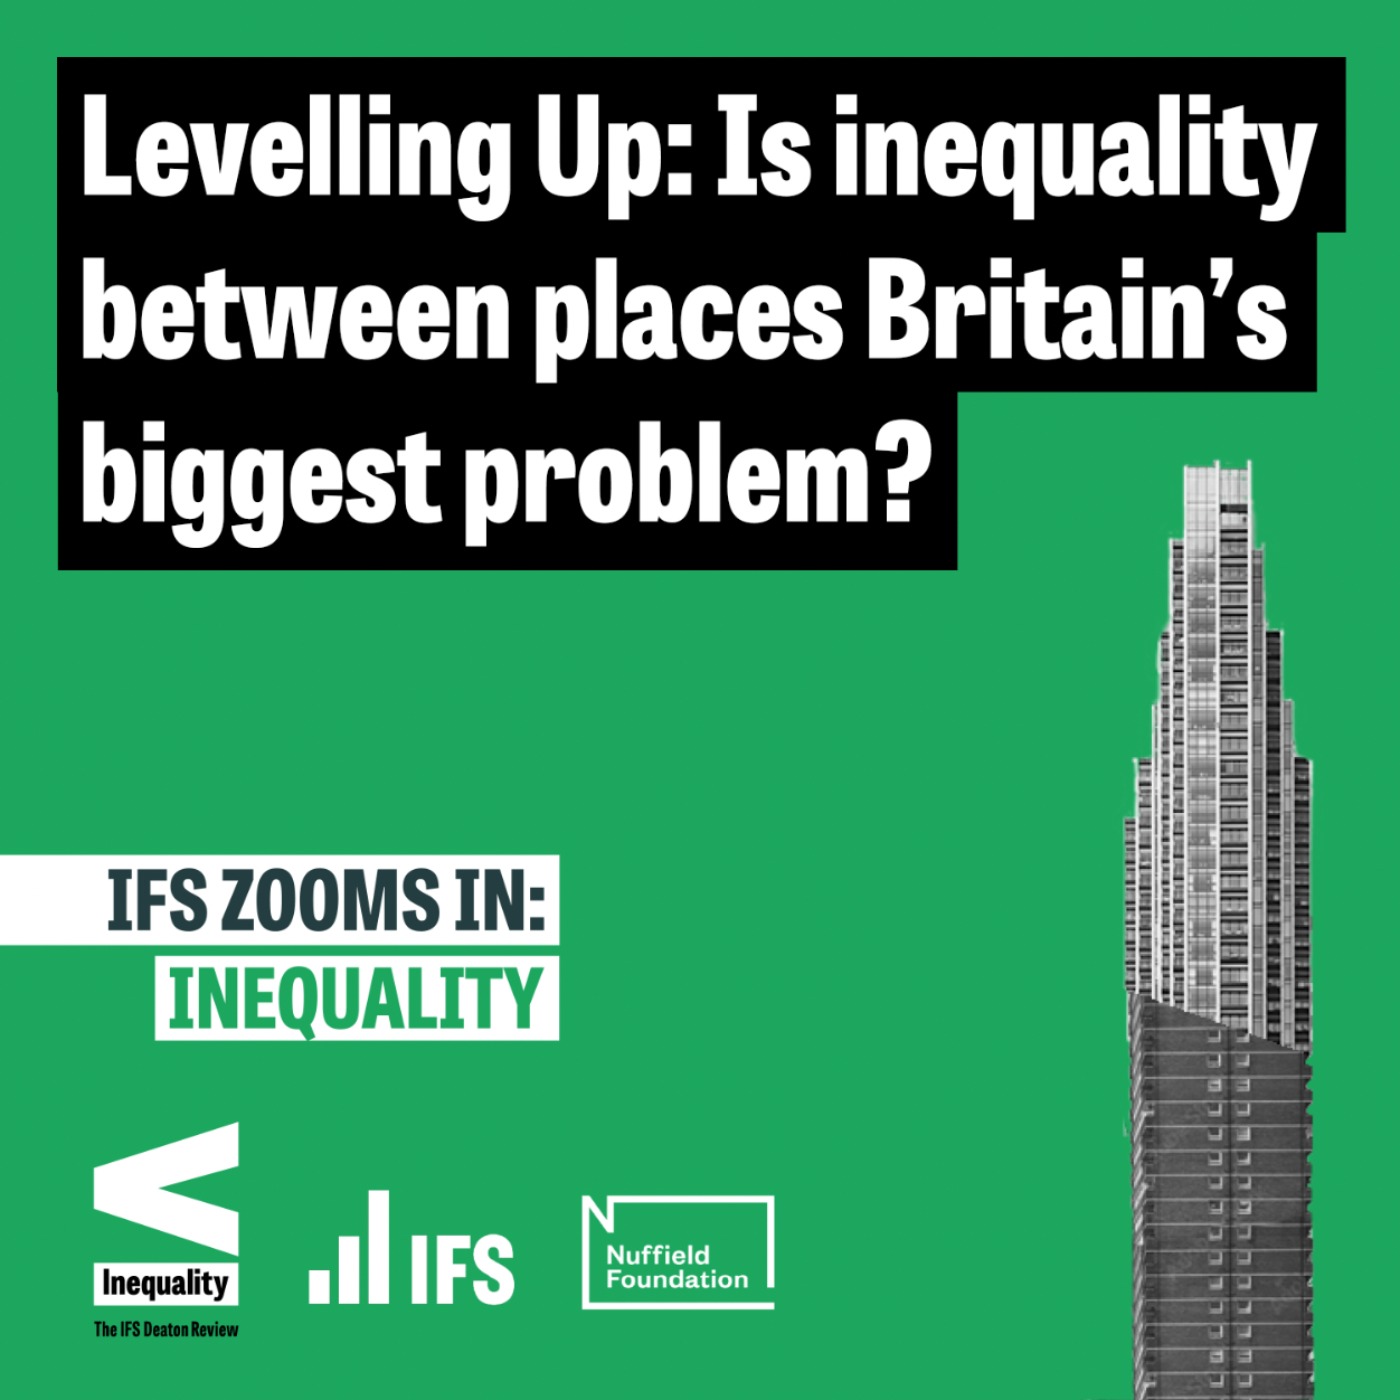 Levelling Up: Is inequality between places Britain’s biggest problem?